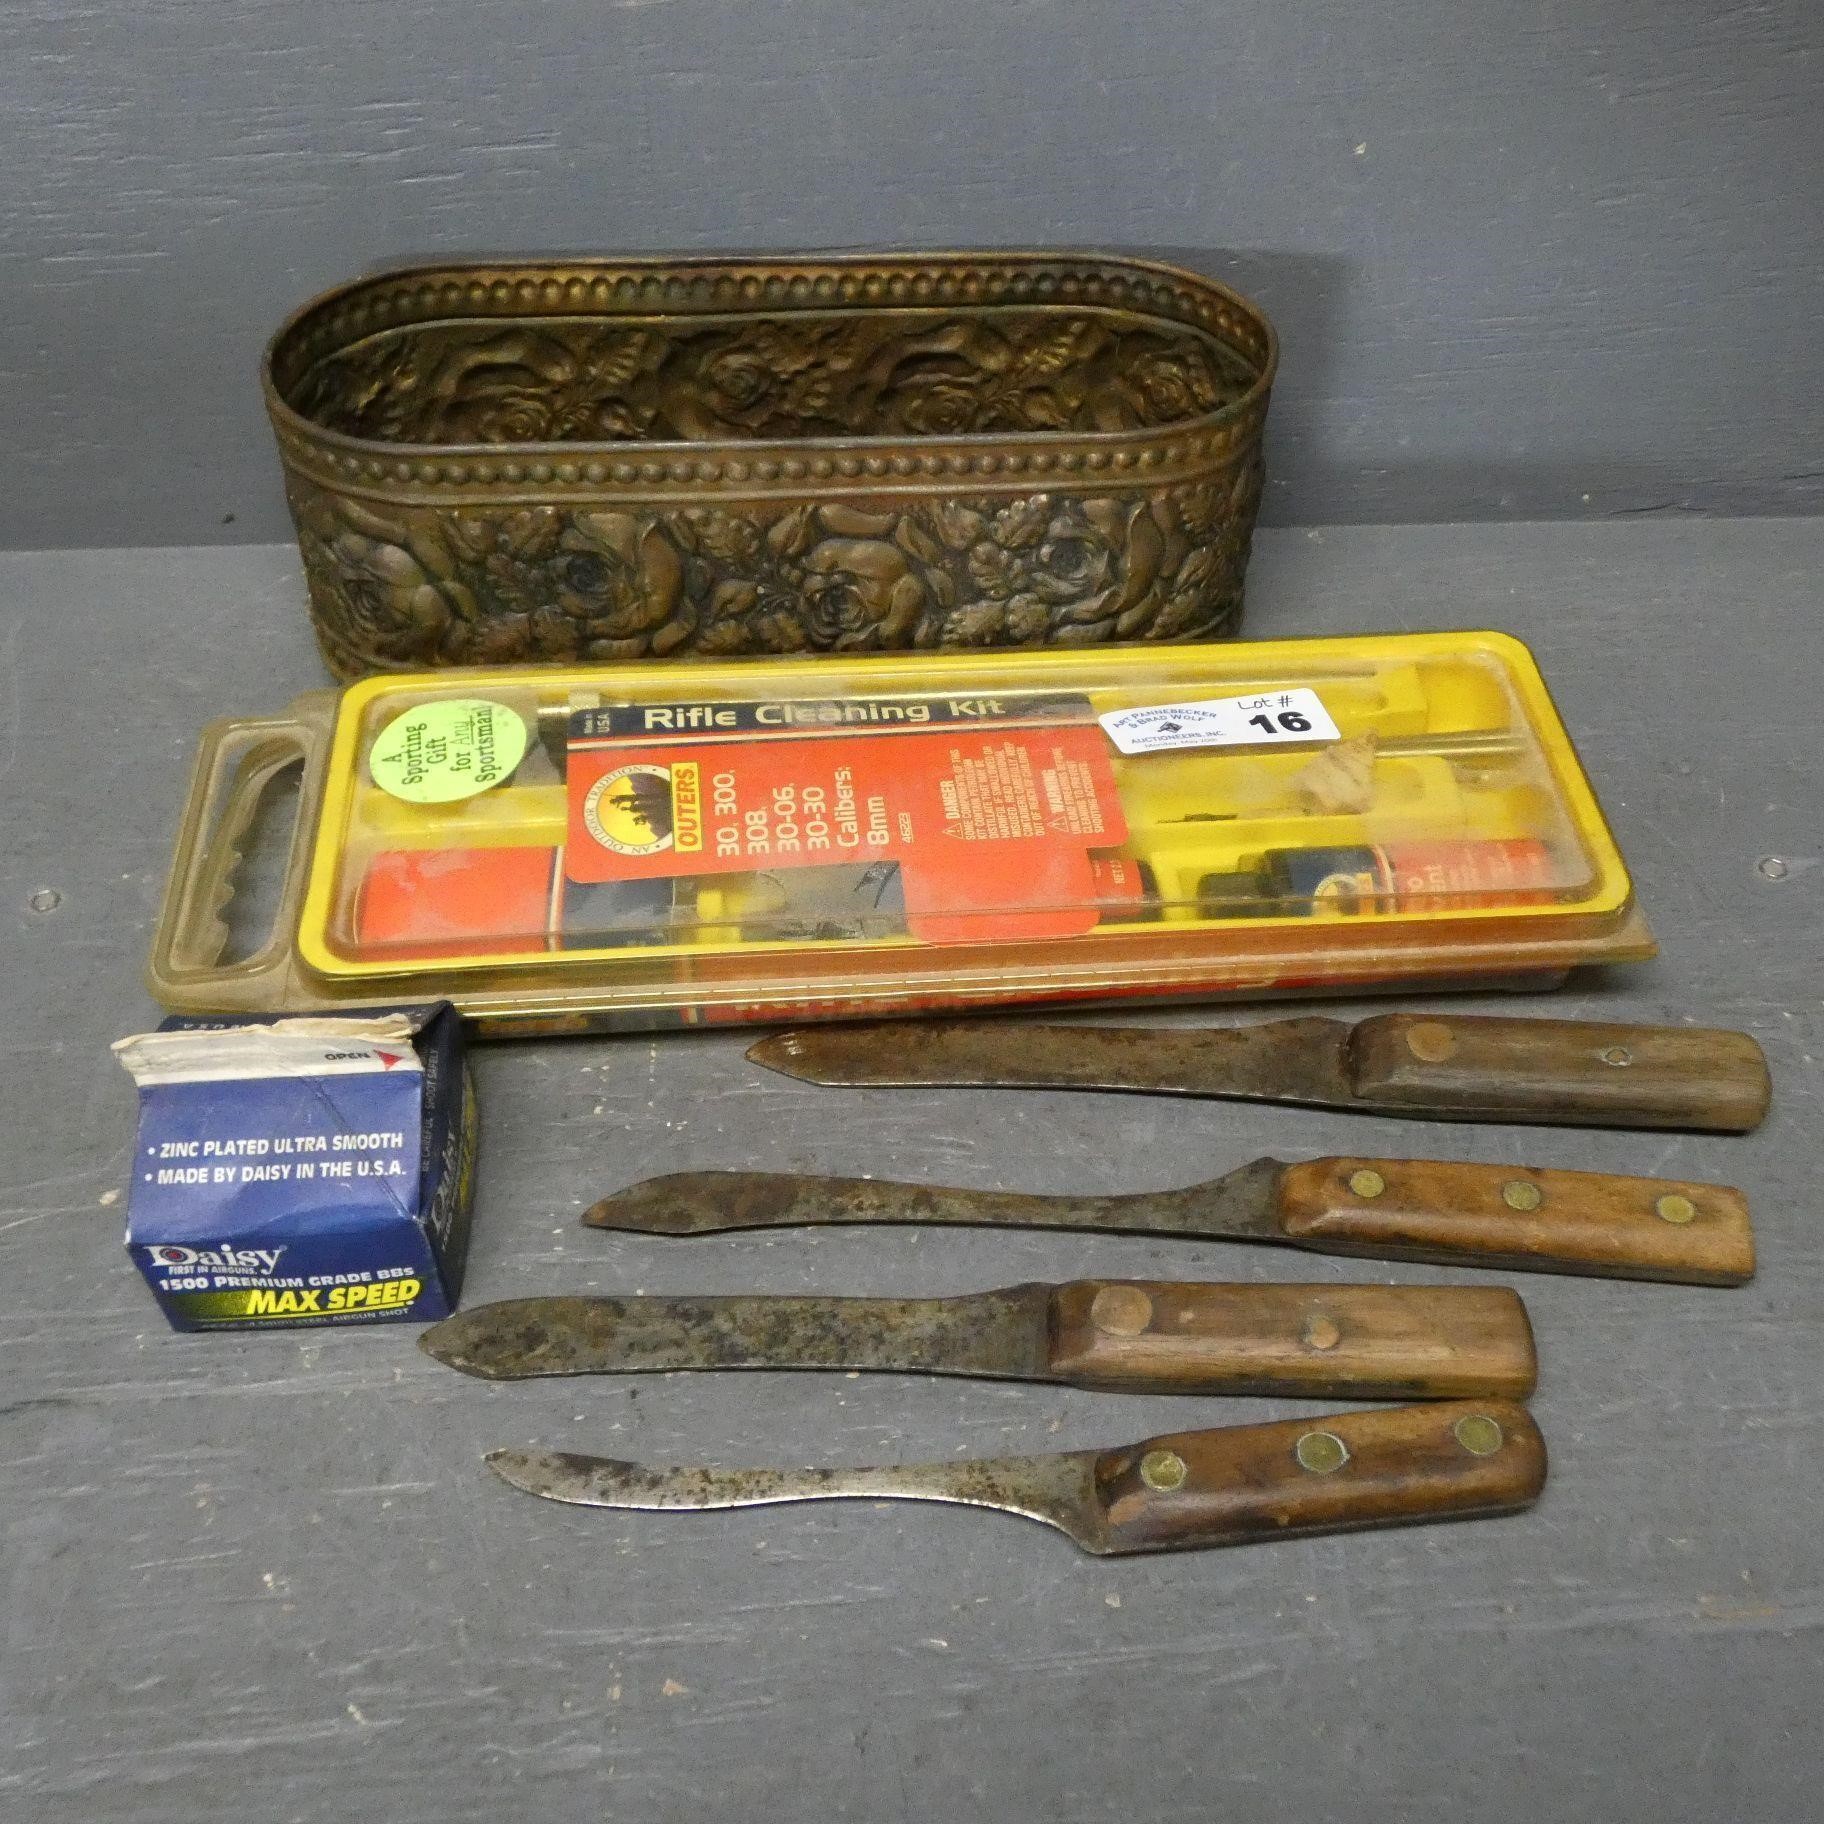 Rifle Cleaning Kit & Assorted Knives